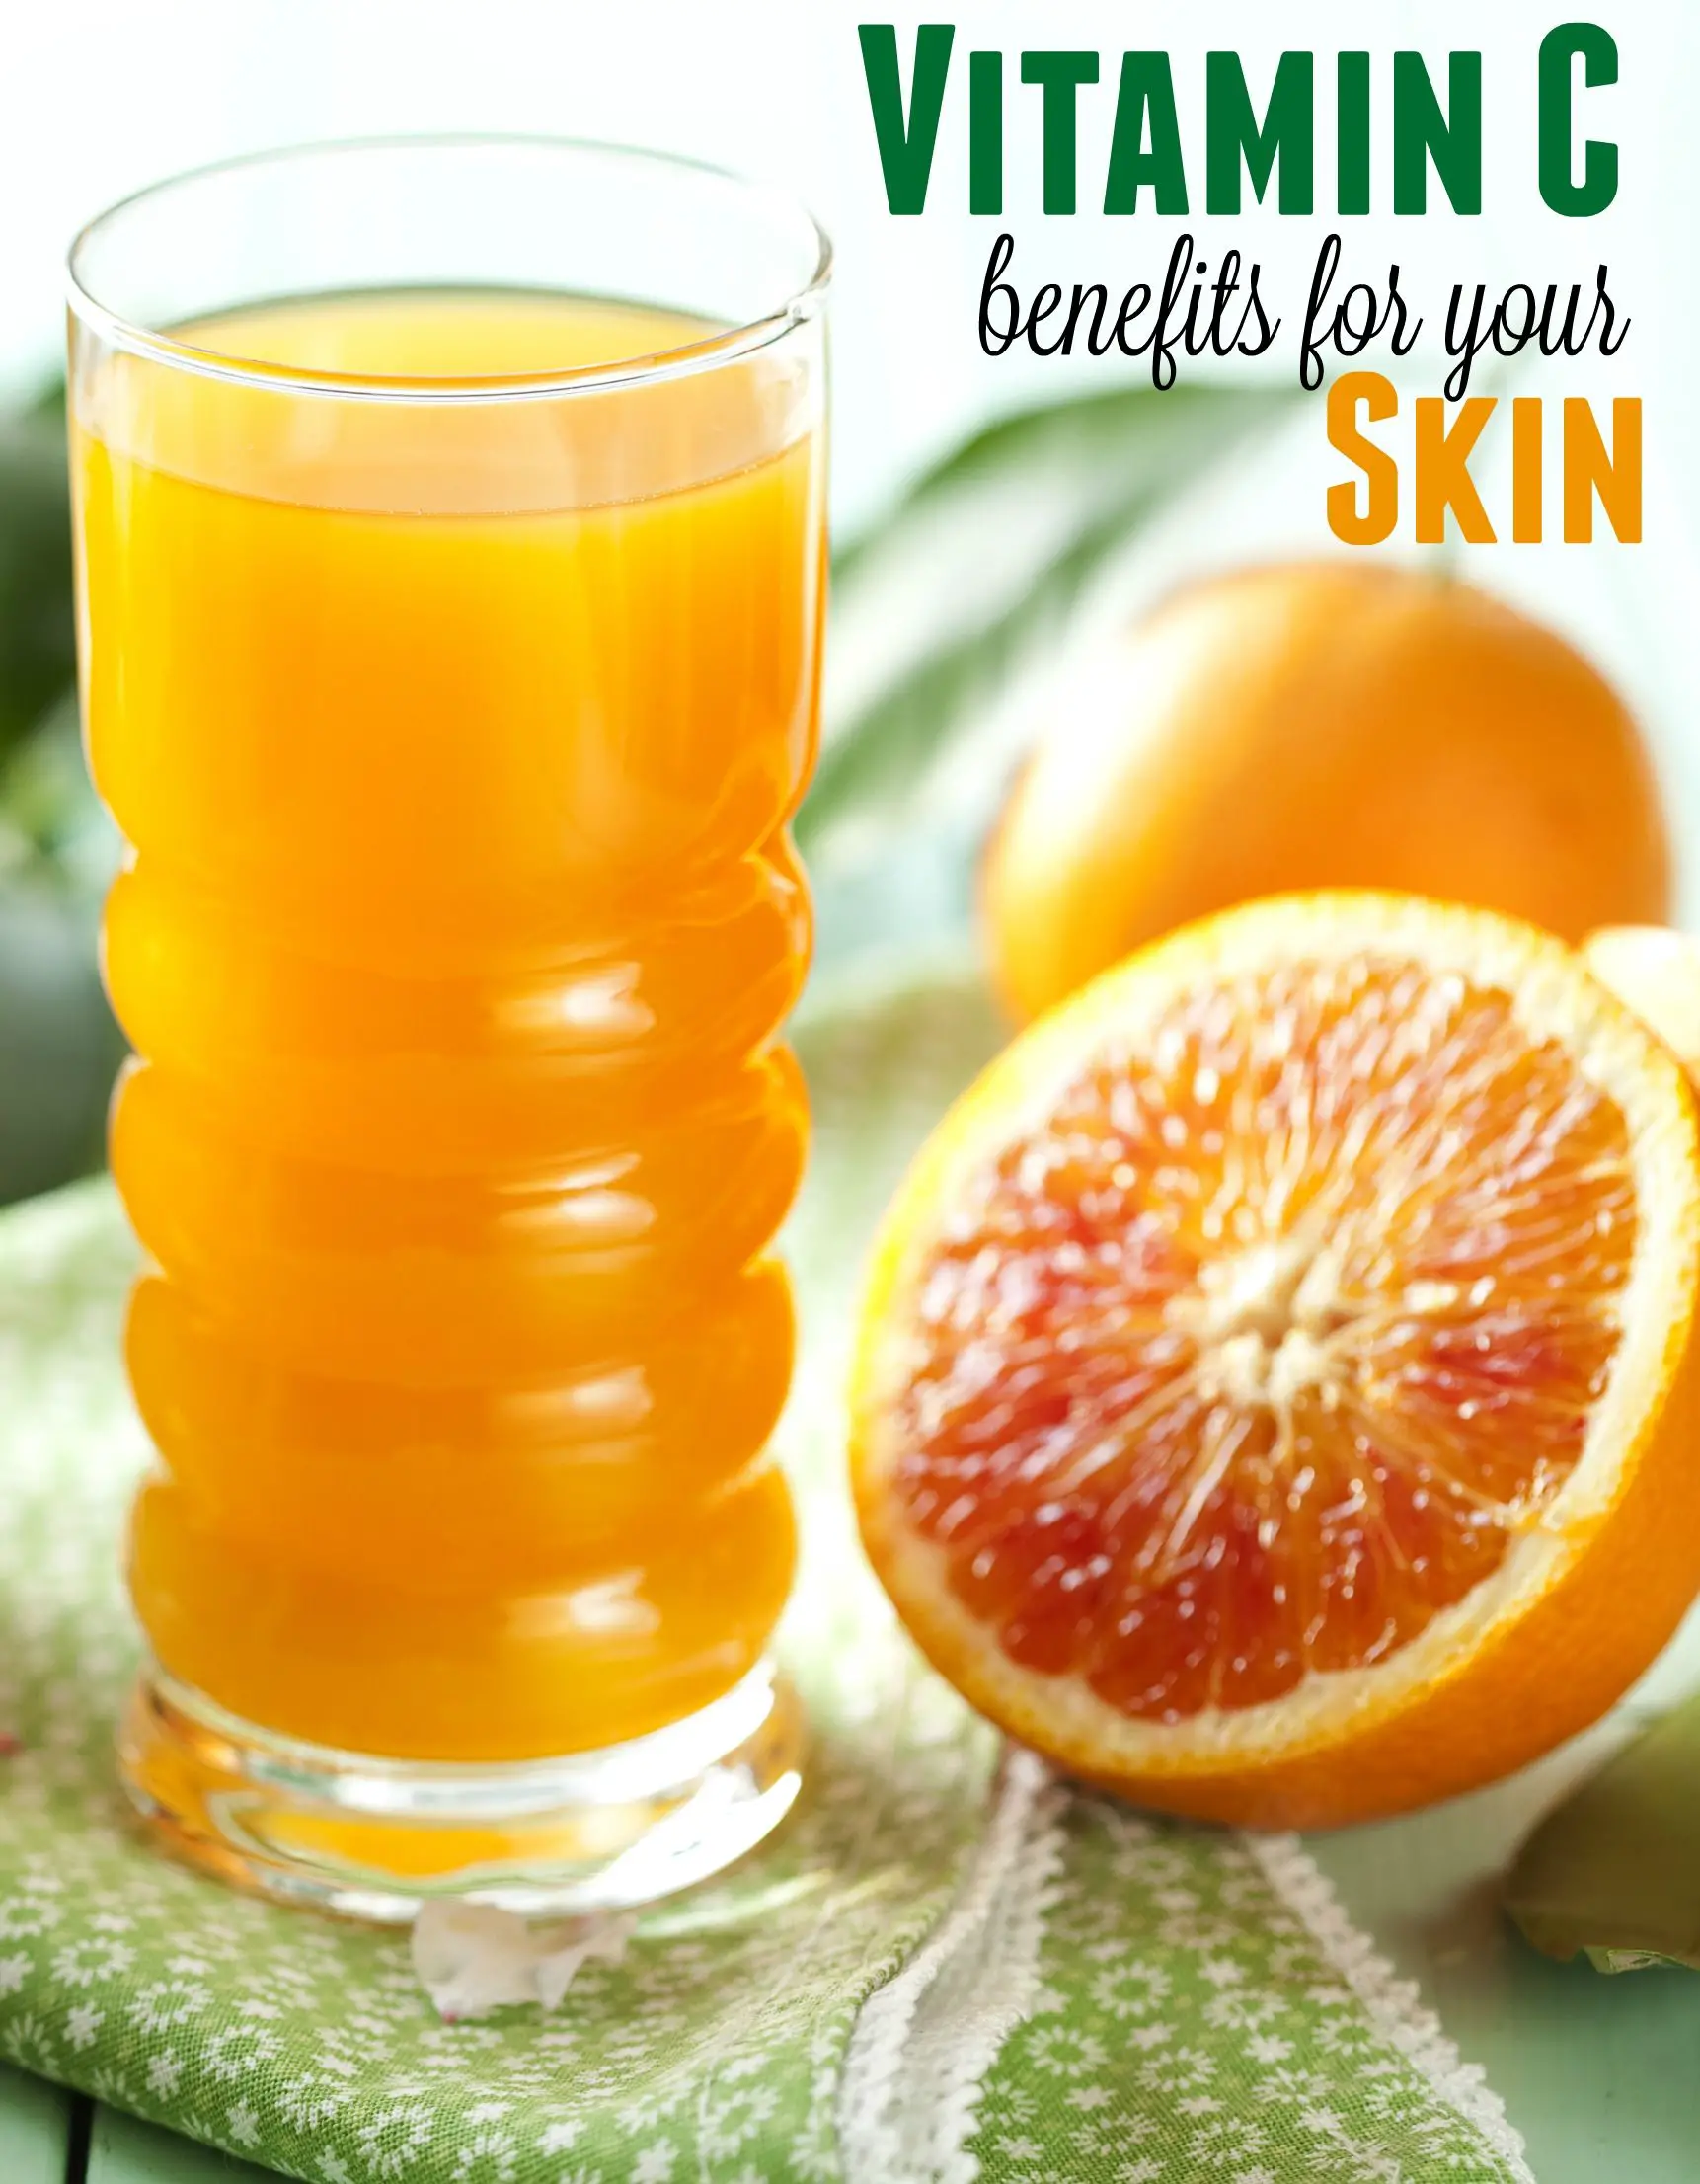 How to Get Benefits of Vitamin C for Your Skin